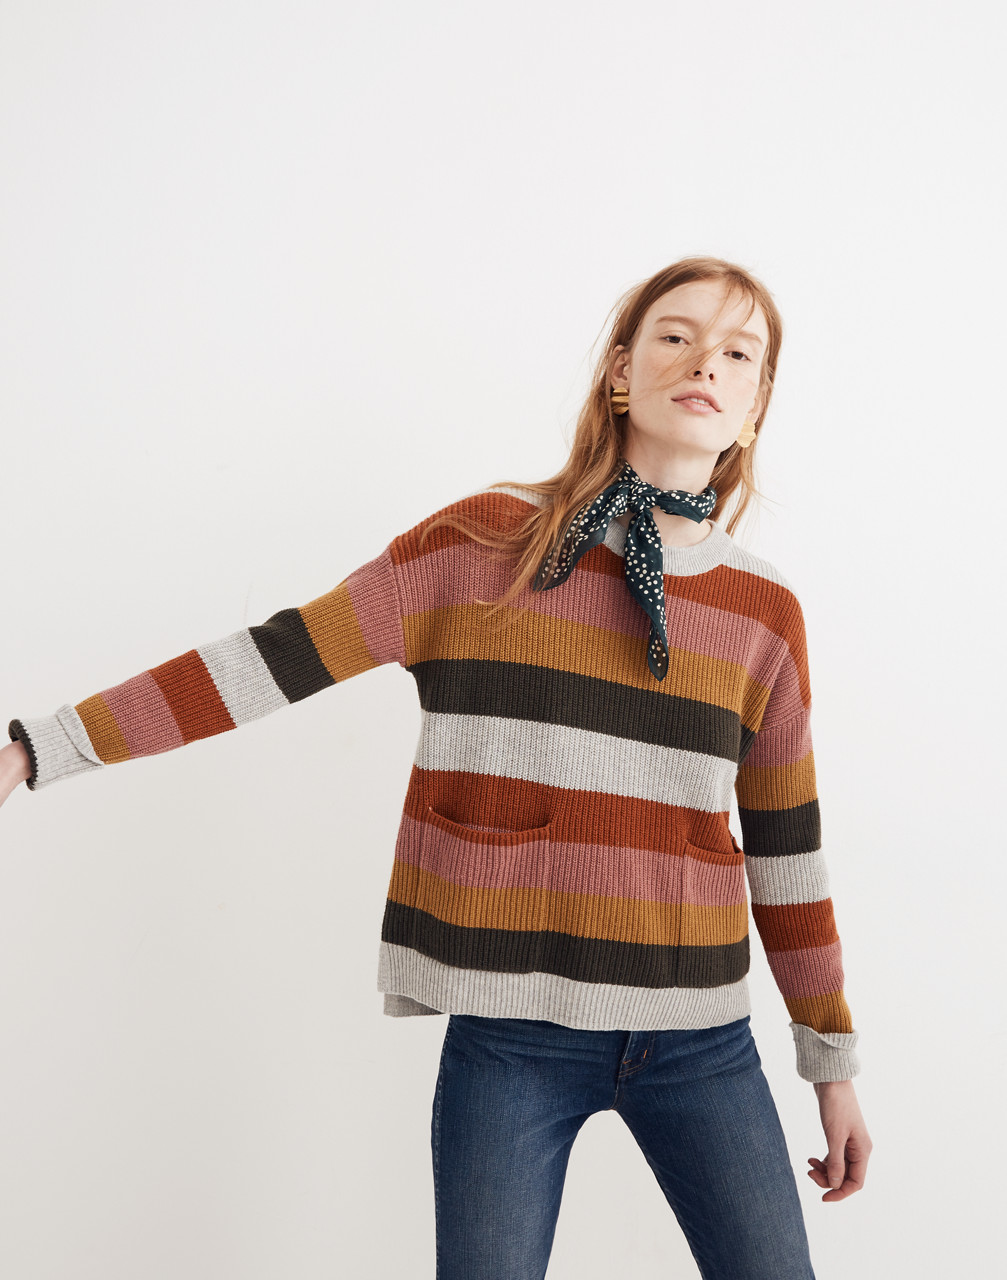 Patch Pocket Pullover Sweater in Walton Stripe in arctic ice image 1